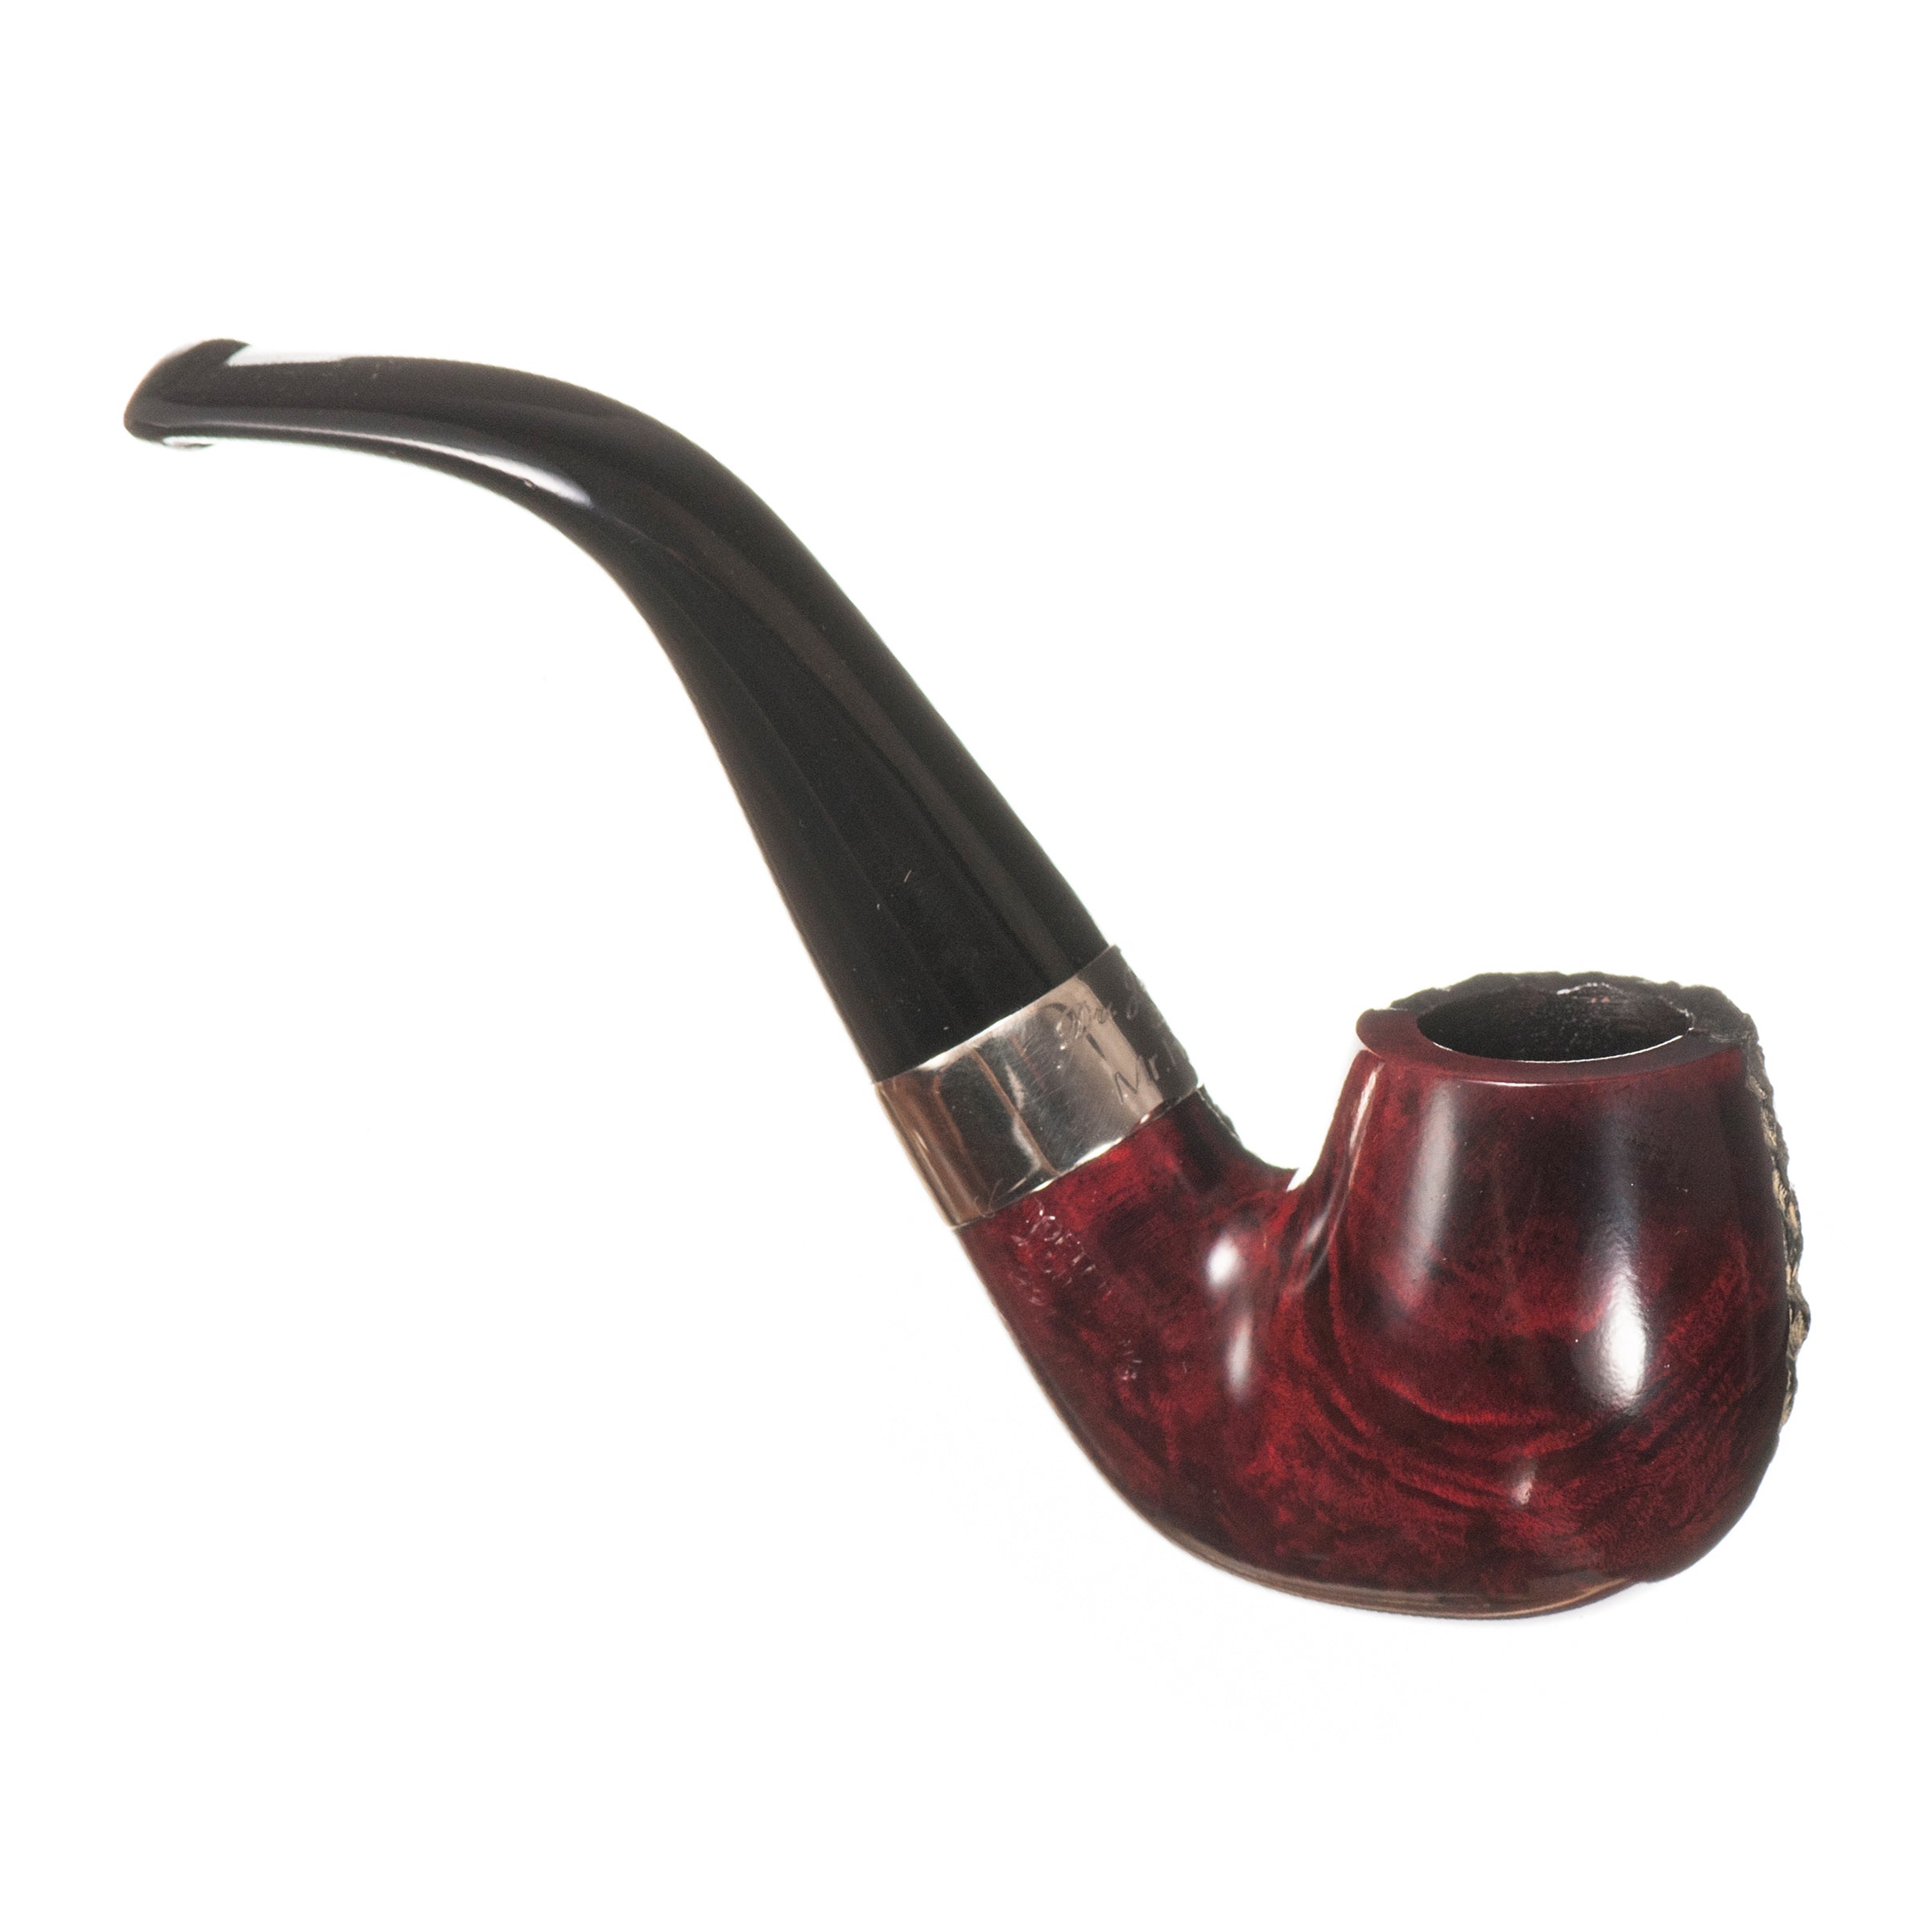 Peterson Jekyll & Hyde 221 Rustic/Smooth Pipe